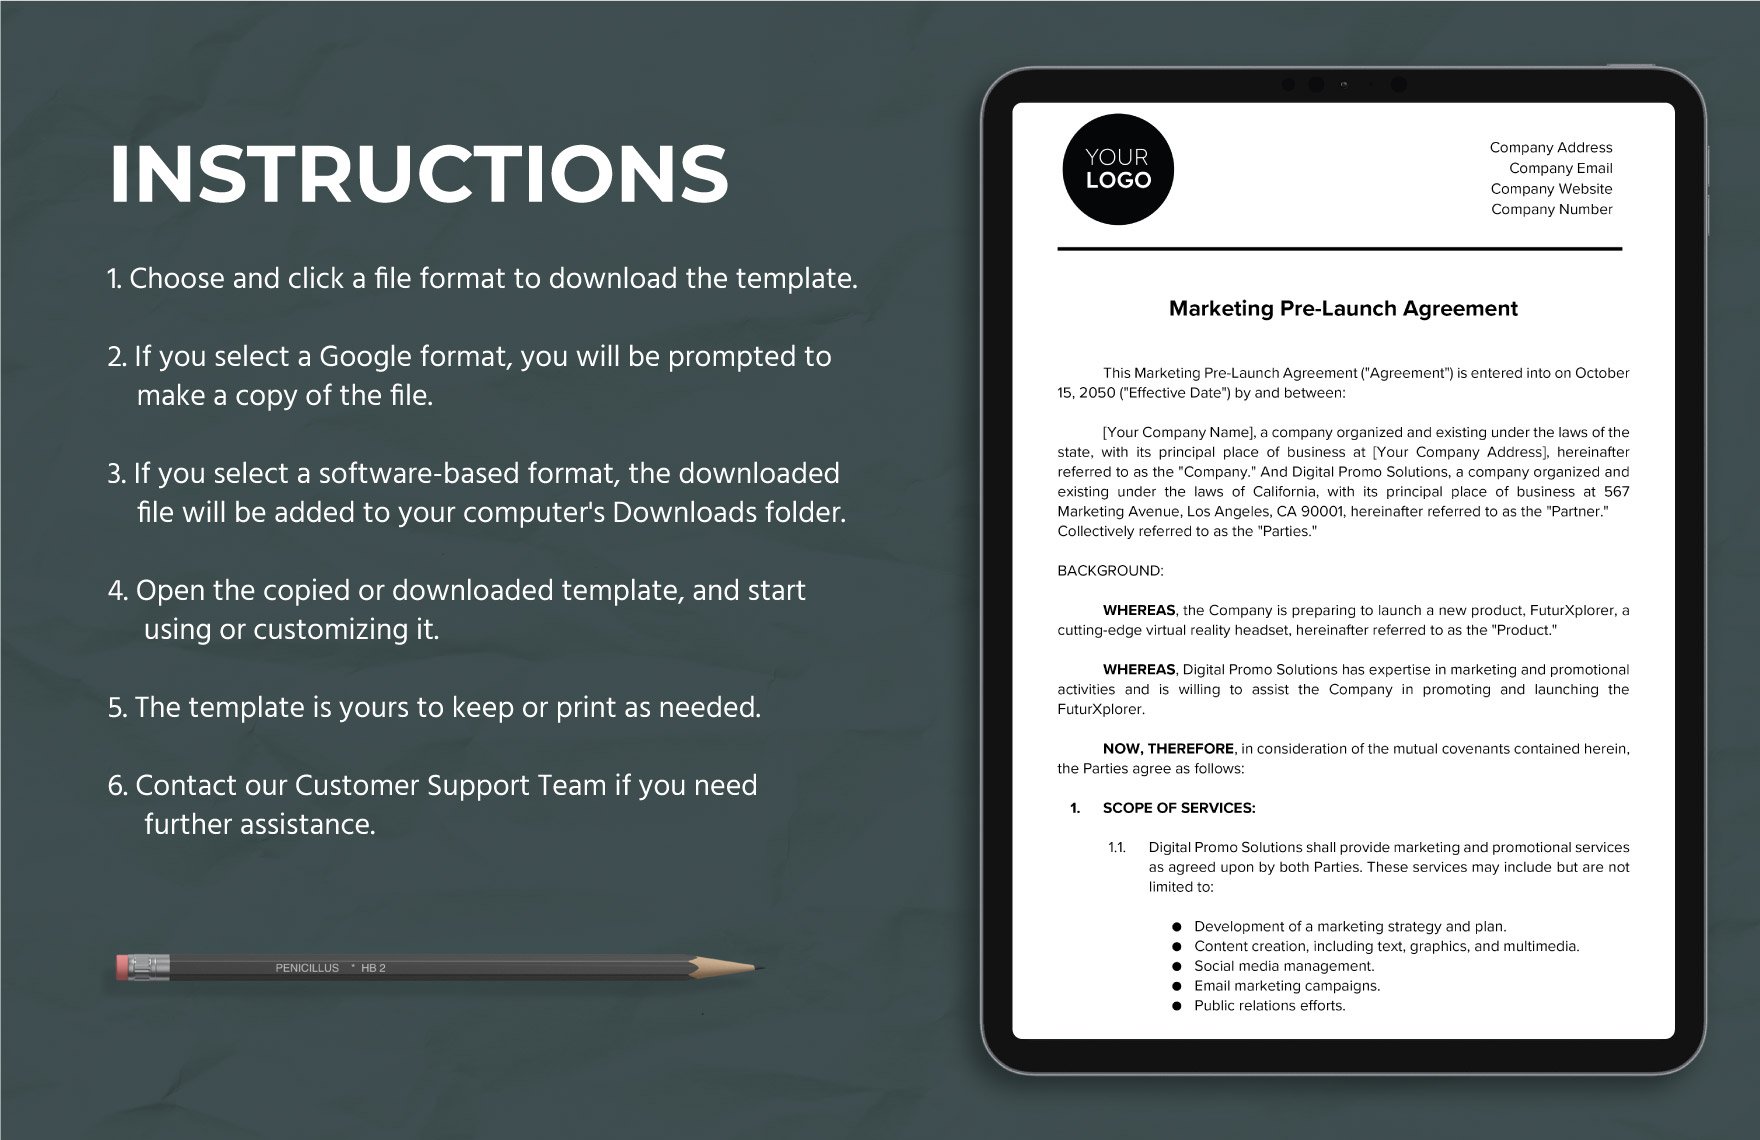 Marketing Pre-Launch Agreement Template